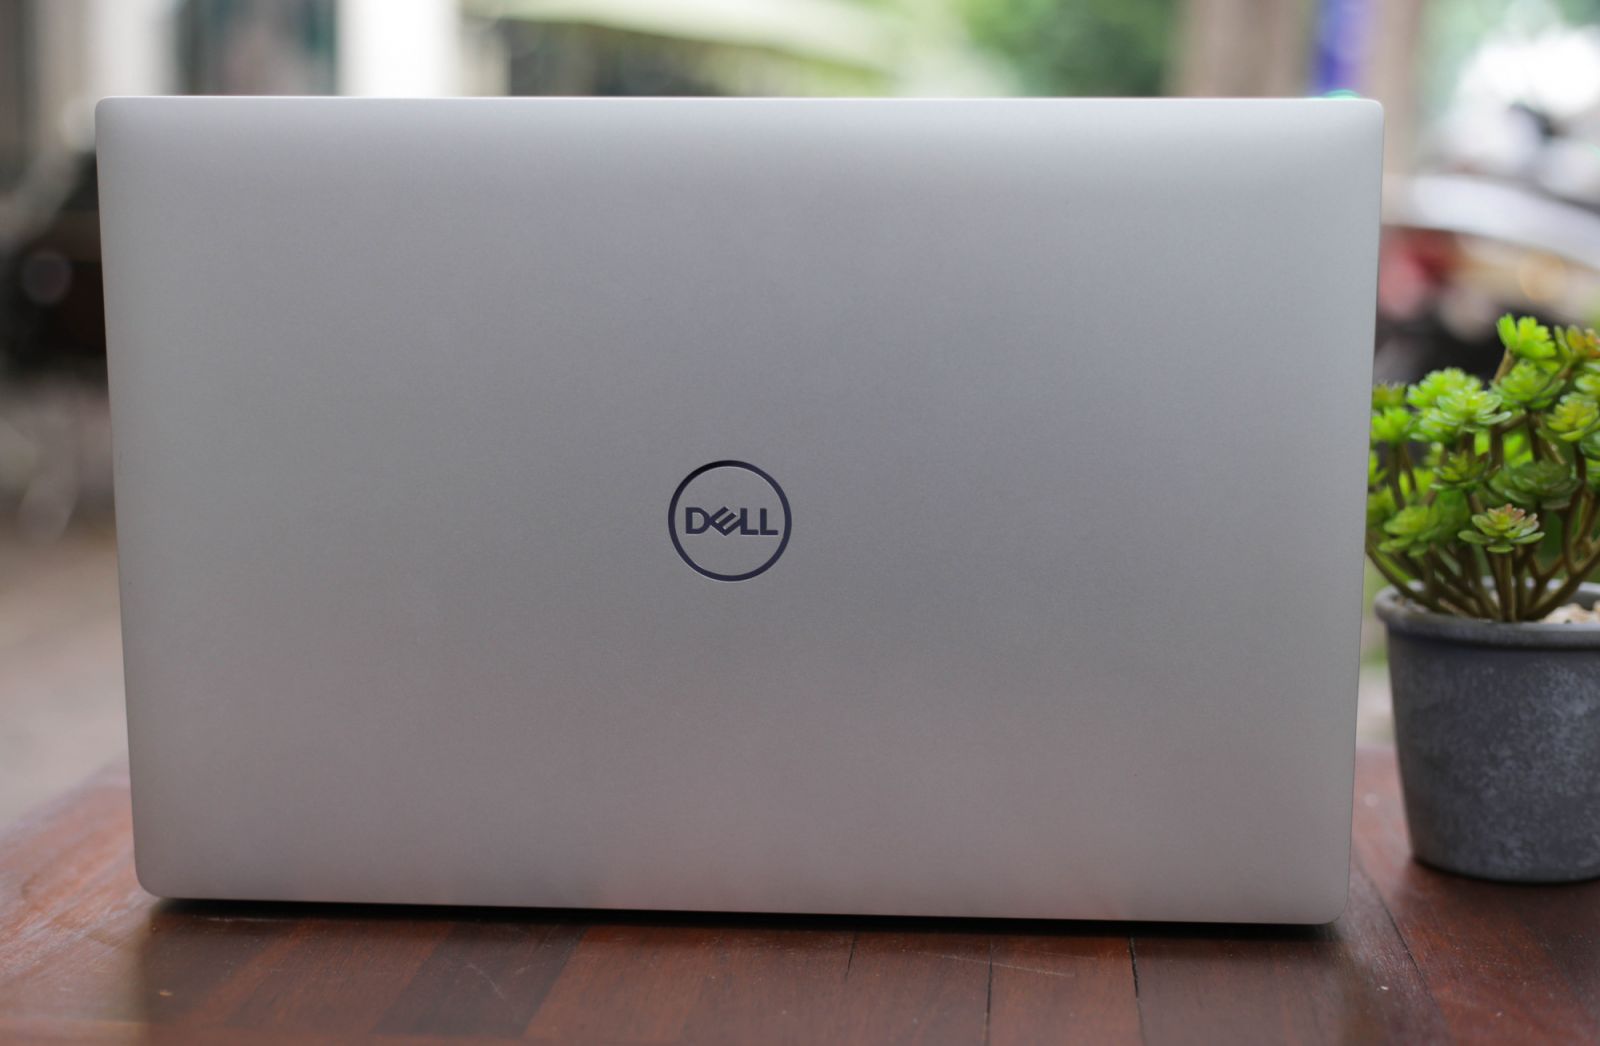 Dell XPS 15 9570 i7 8750H Giá rẻ